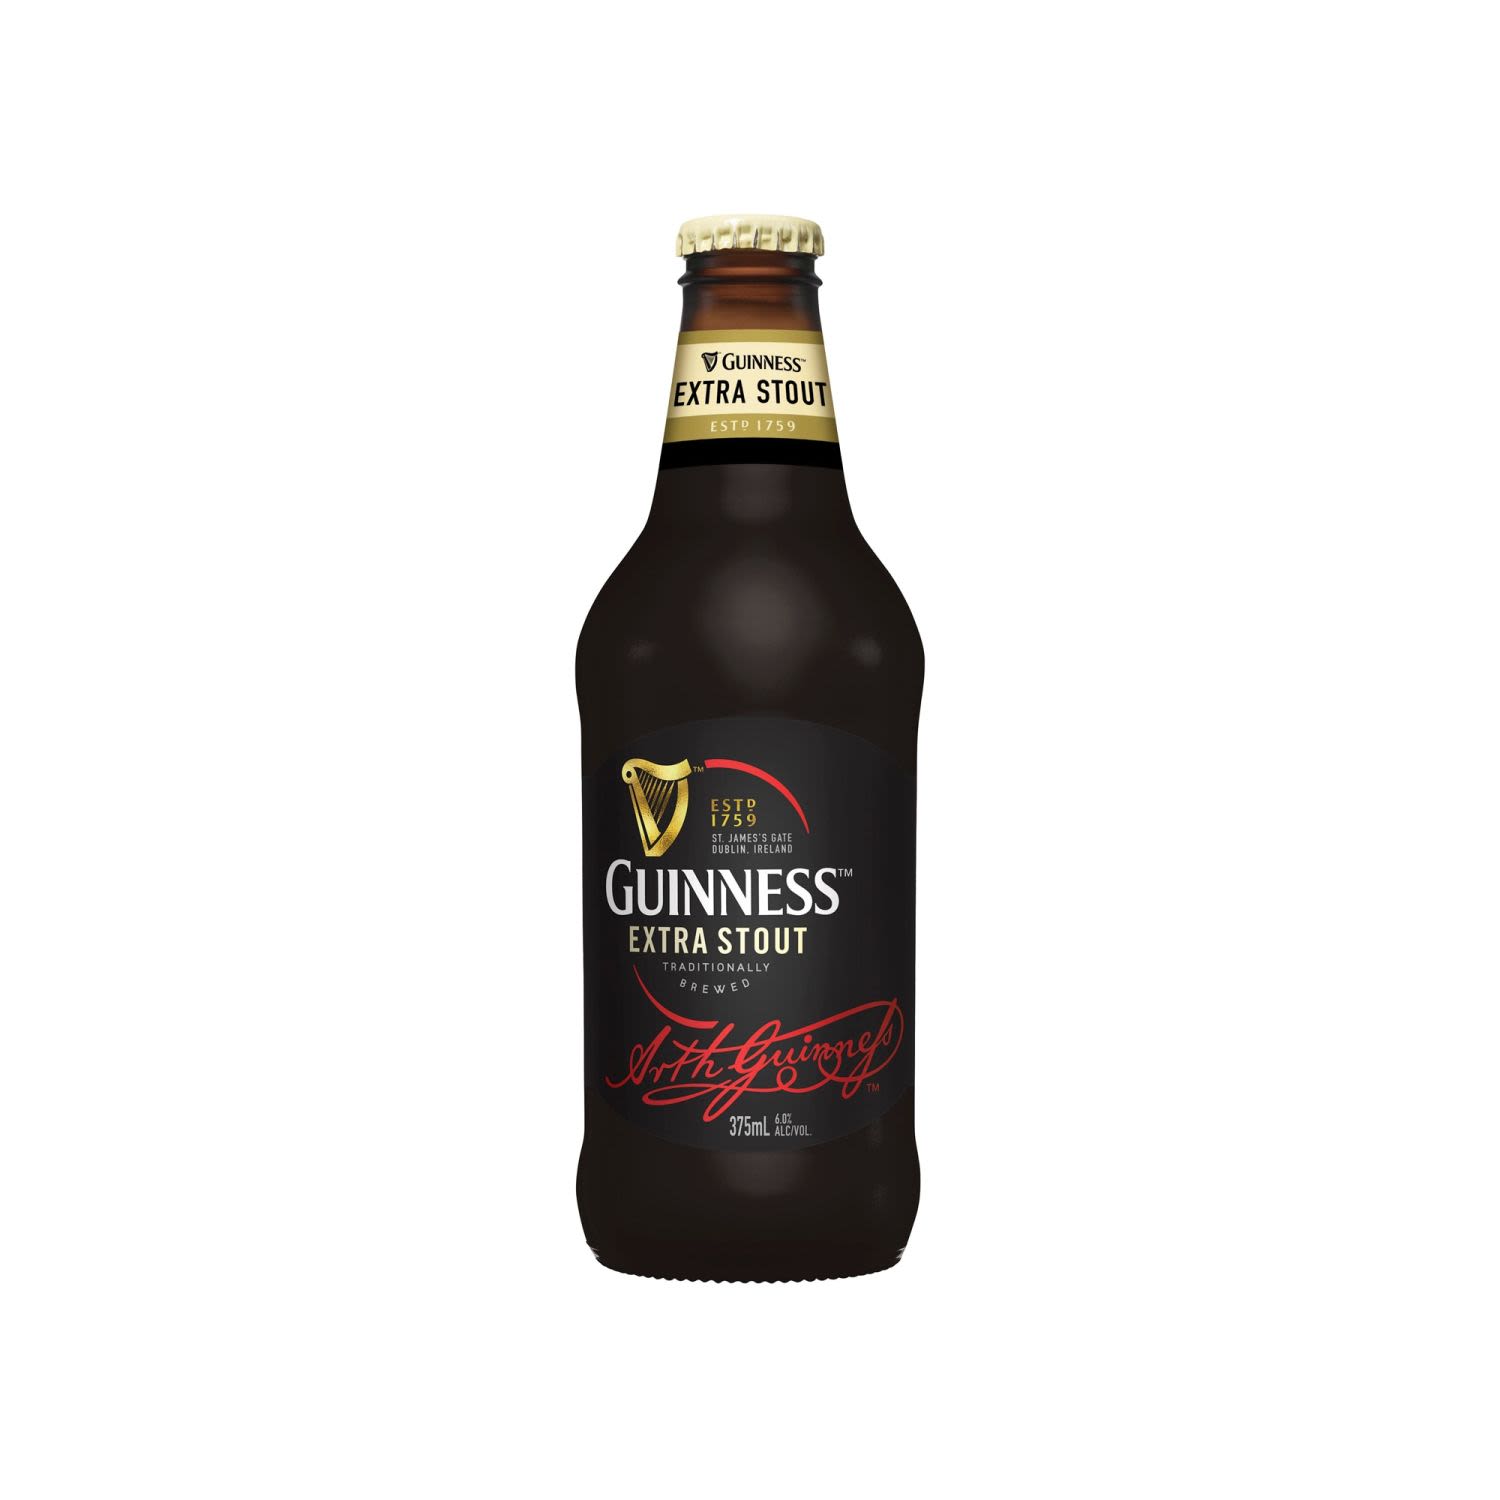 The crisp hint of roasted barley, the fresh breeze of hops. The refreshing bite. The bittersweet reward. Pure beauty; pure Guinness.<br /> <br />Alcohol Volume: 6.00%<br /><br />Pack Format: Bottle<br /><br />Standard Drinks: 1.8</br /><br />Pack Type: Bottle<br /><br />Country of Origin: Ireland<br />